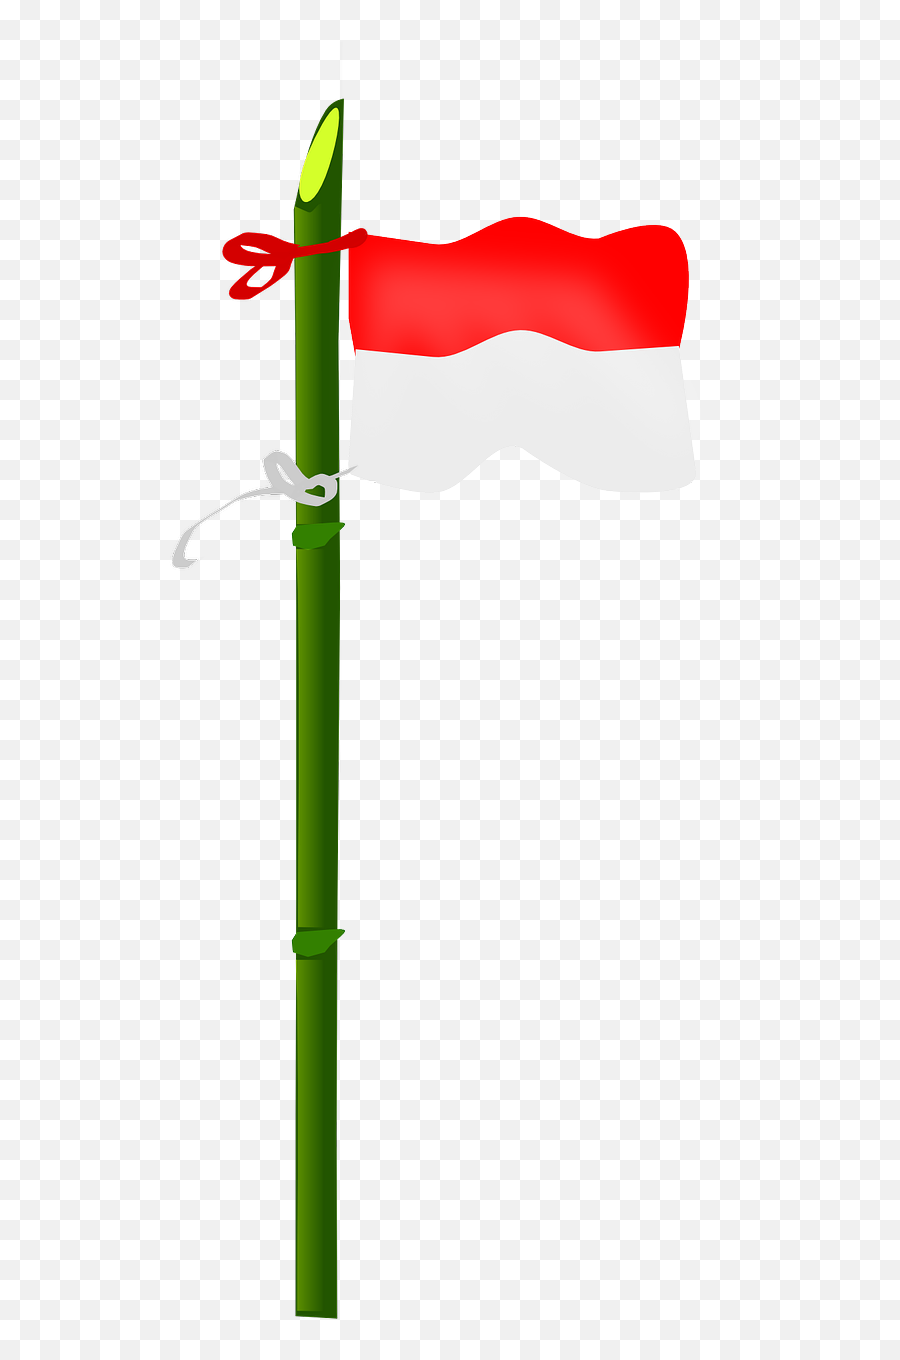 Flagpole Bamboo Flag - Free Vector Graphic On Pixabay Indonesian Flag Clip Art Png,Flag Pole Png